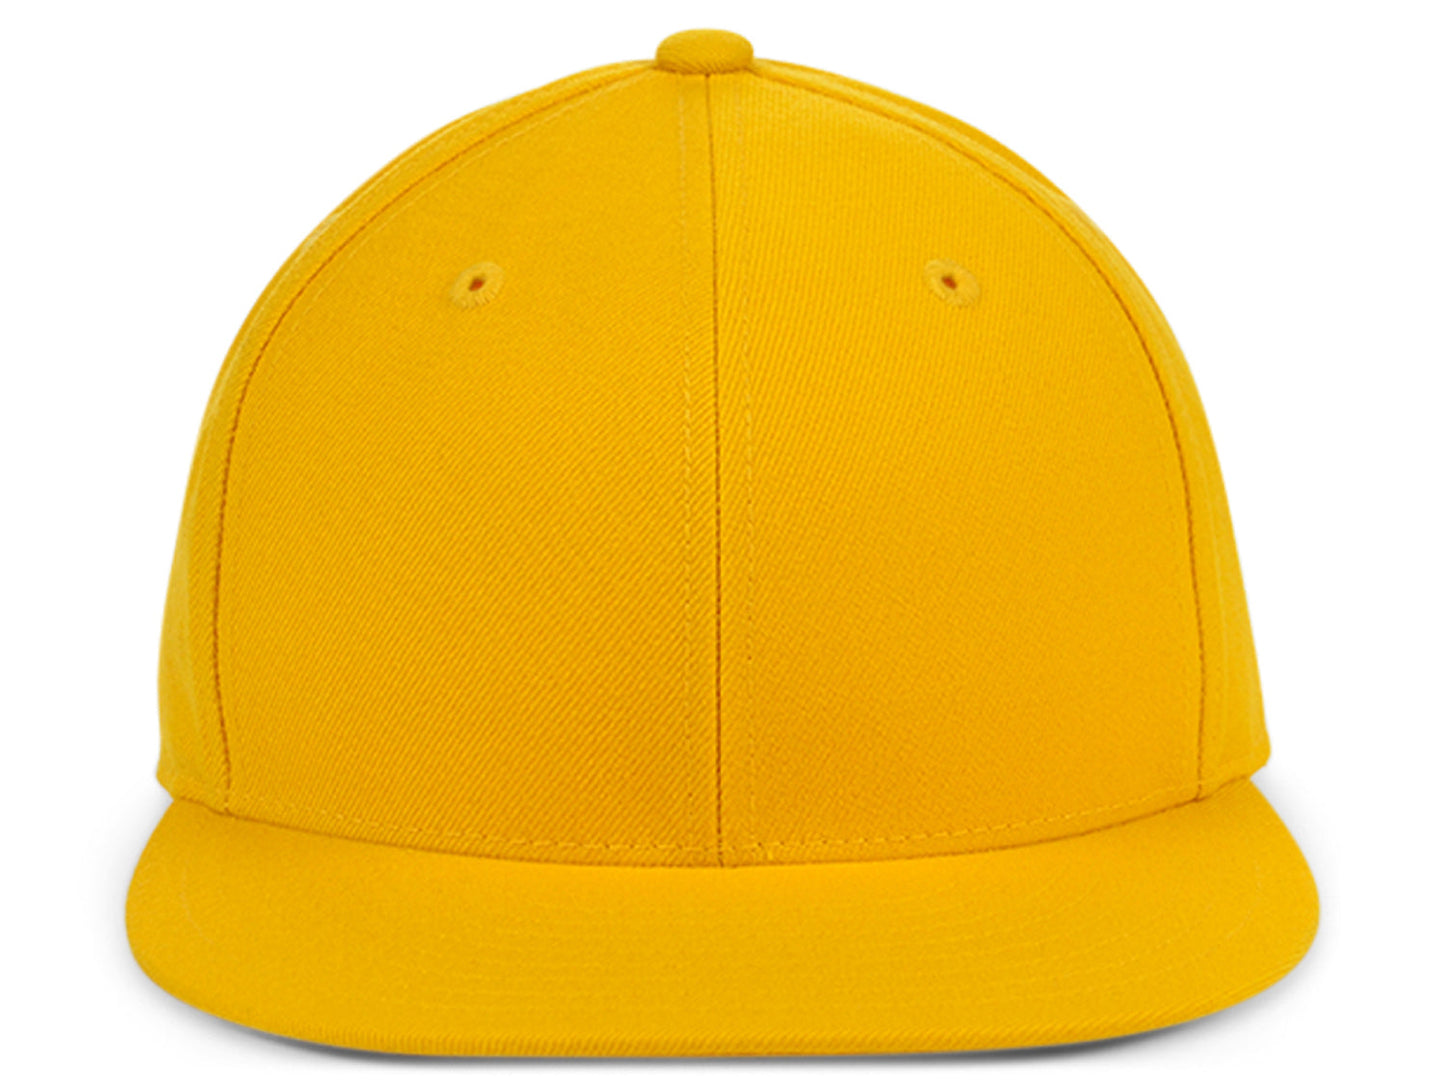 Flexfit Grandslam Fitted - Yellow